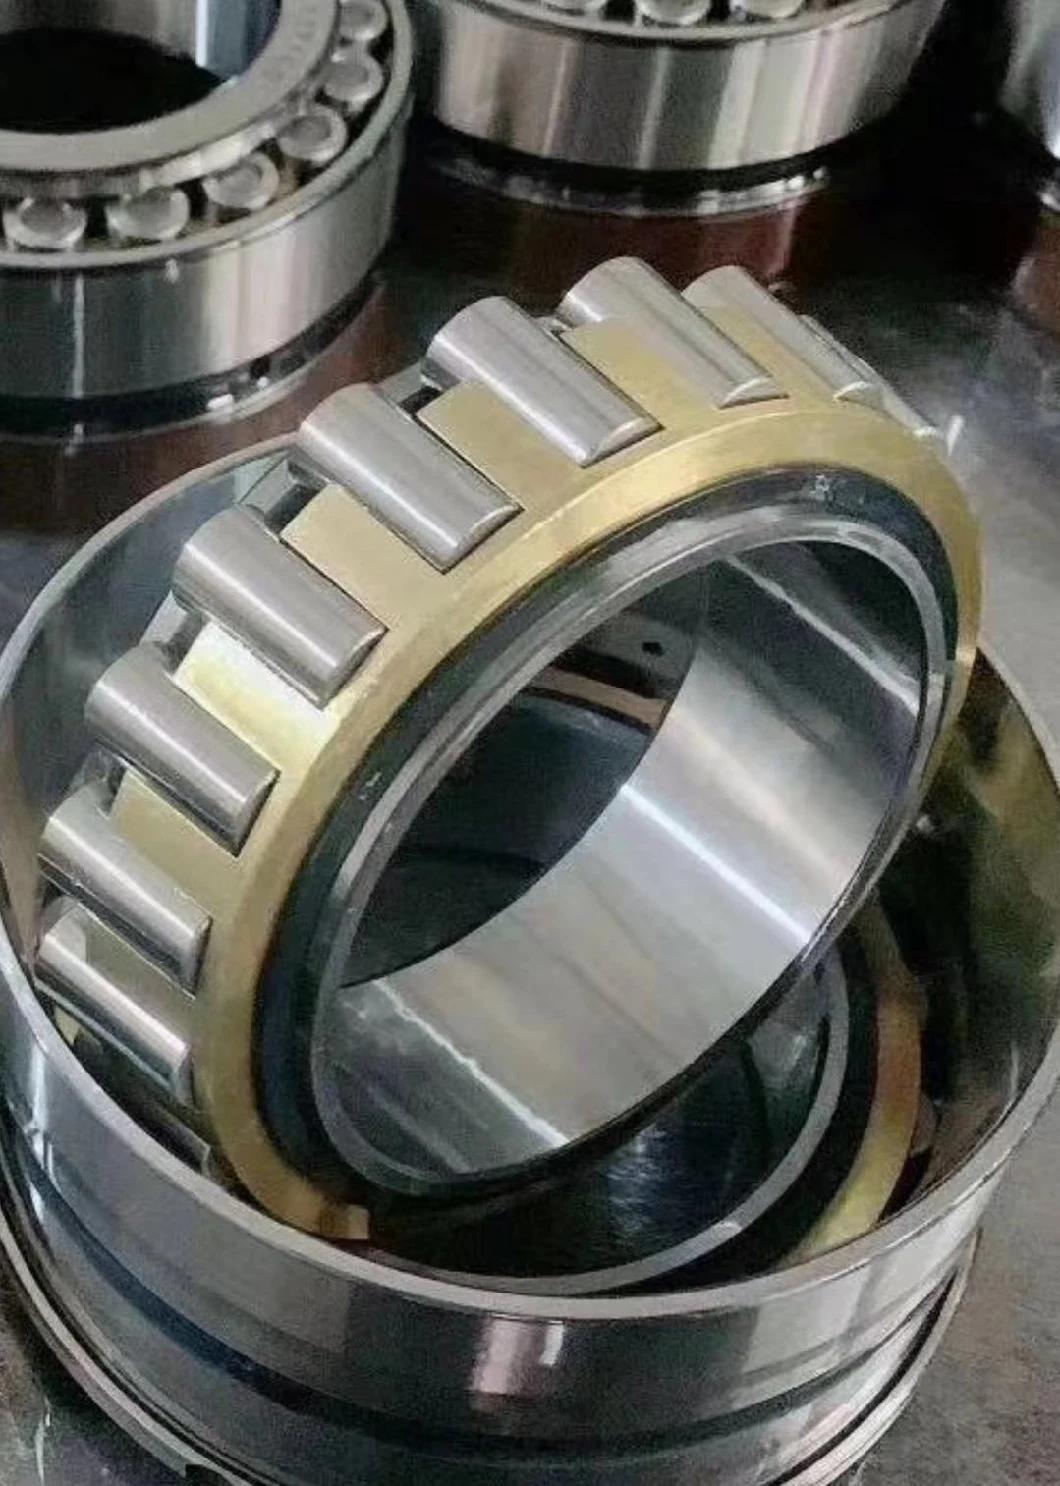 Tapered Roller Bearing 7626*